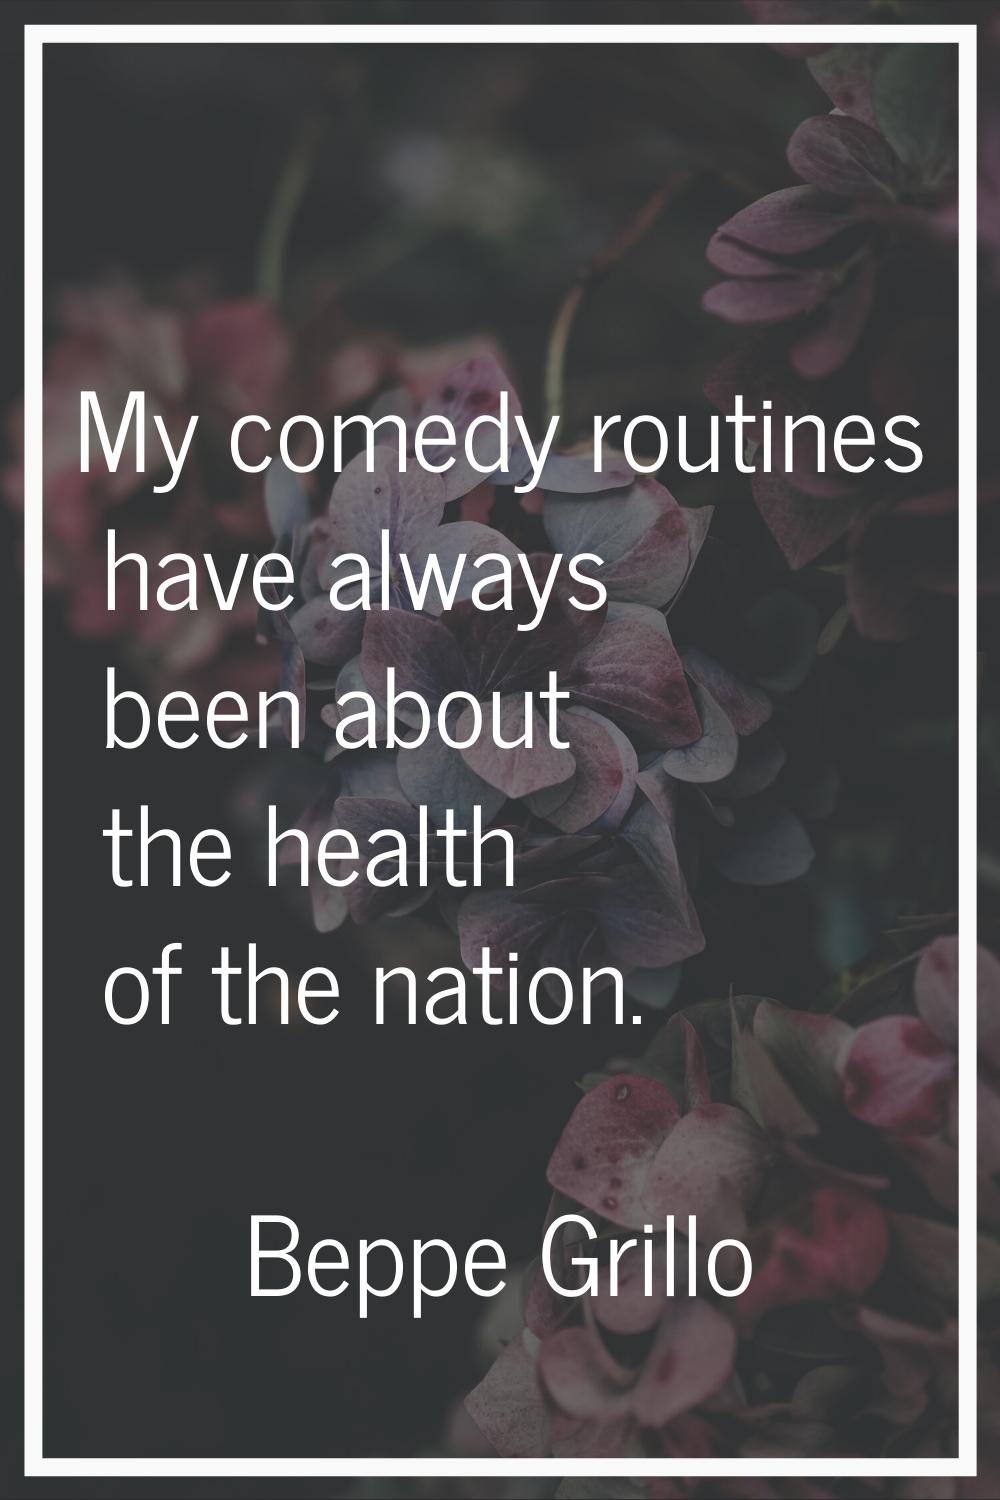 My comedy routines have always been about the health of the nation.